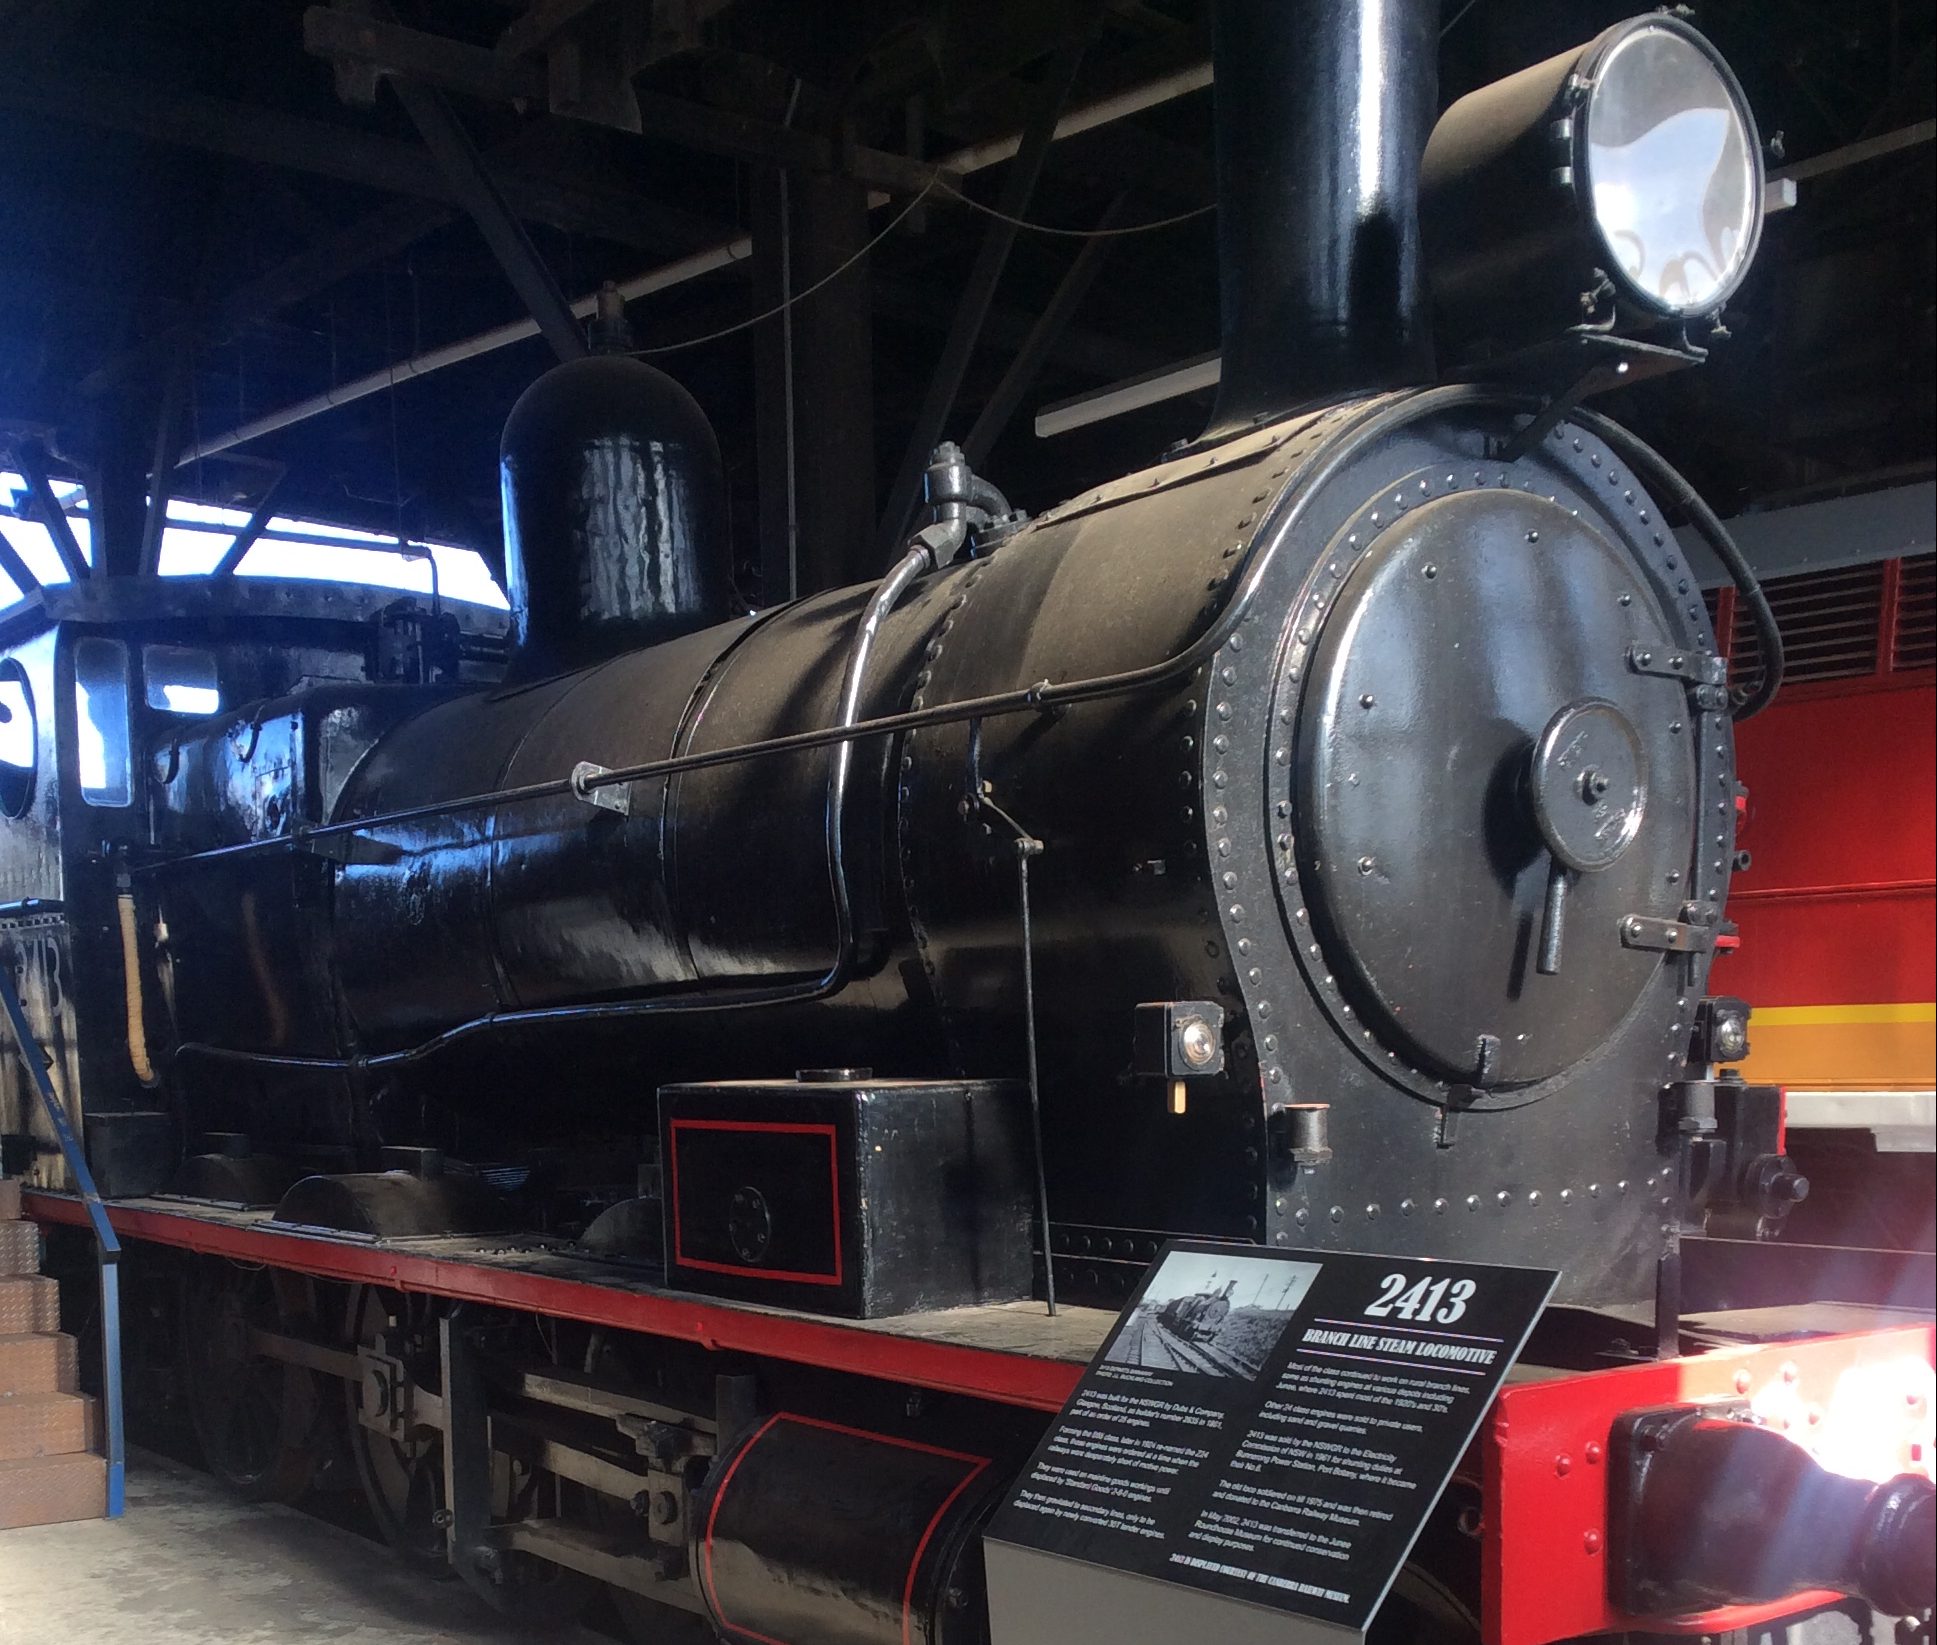 From steam trains to diesel locomotives, Junee preserves its rail links